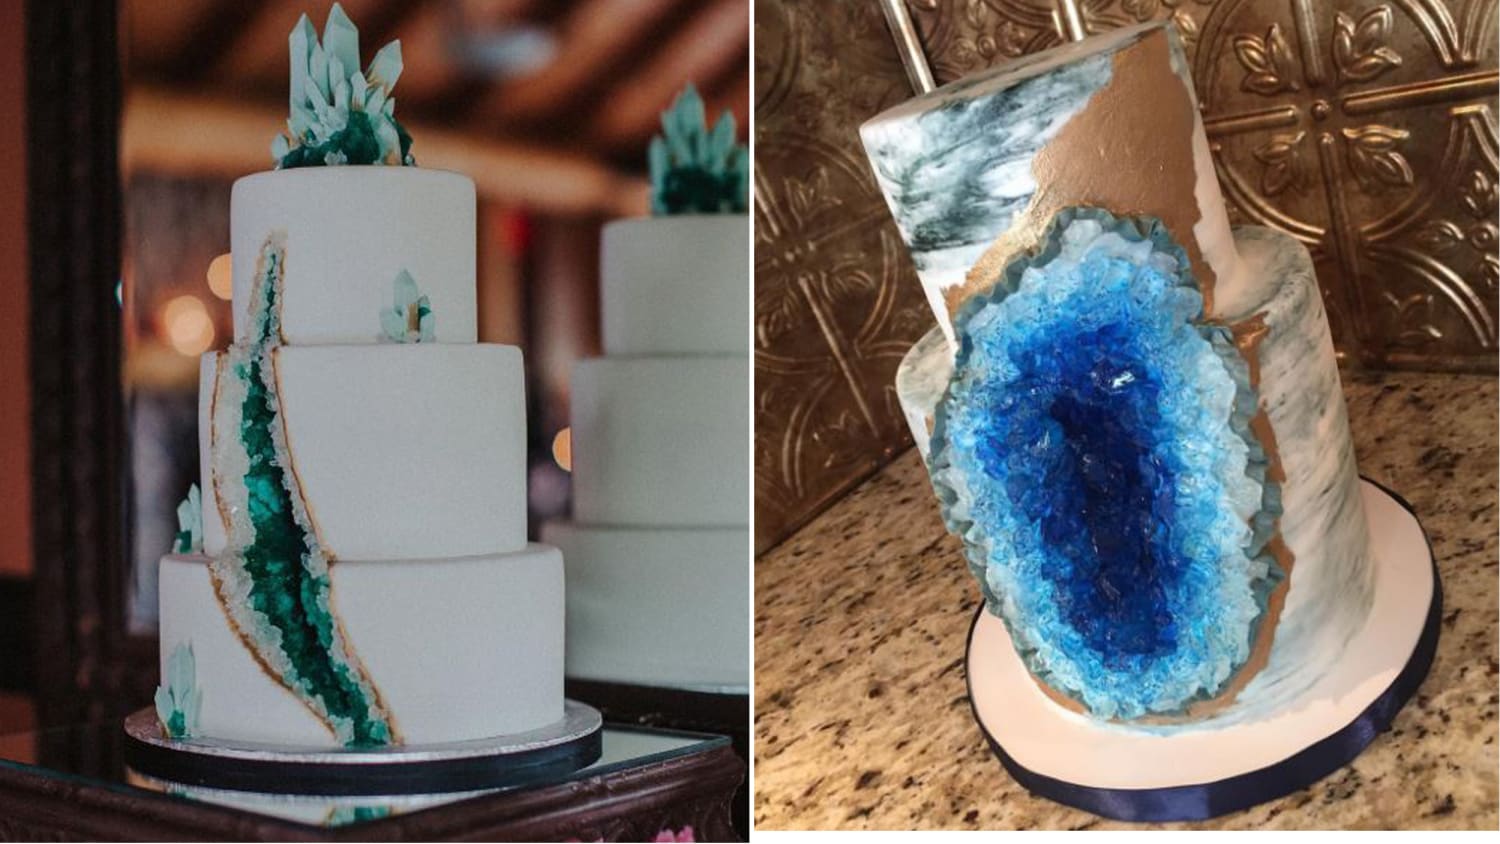 You Can Send A Vagina Geode Cake To Your Best Friends Anywhere In The U.S.